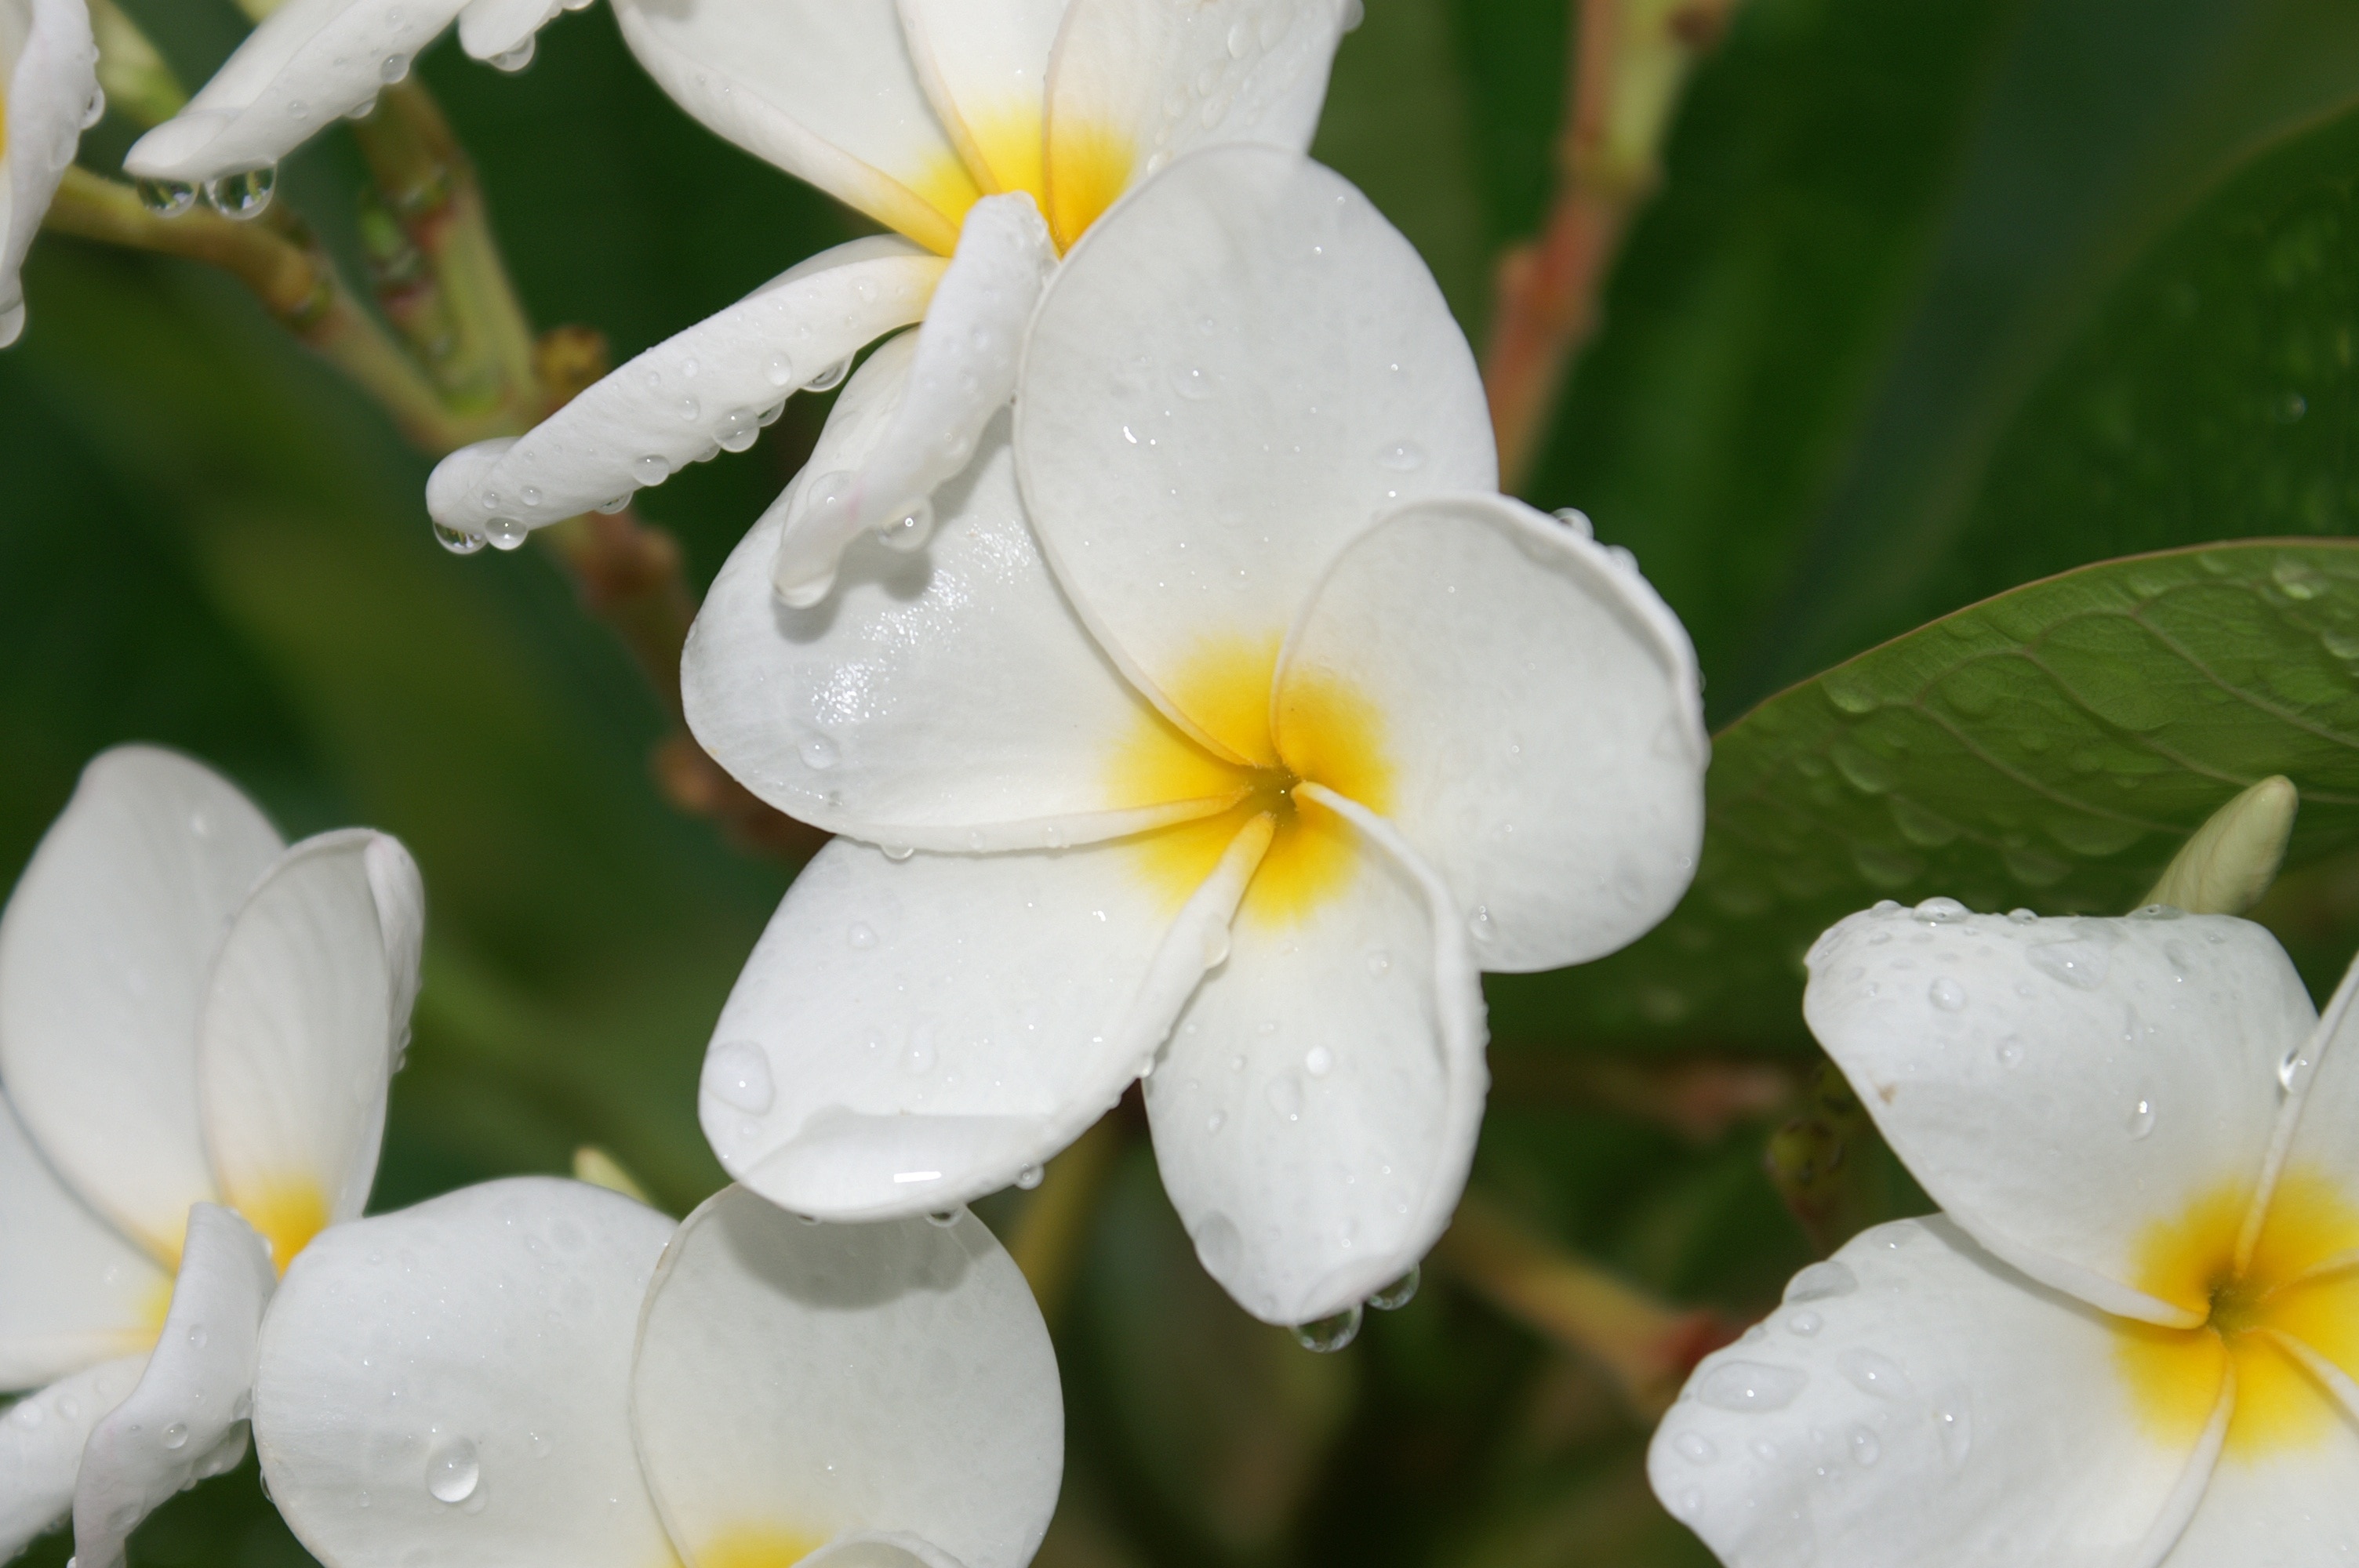 shallow focus photography of white-and-yellow flowers